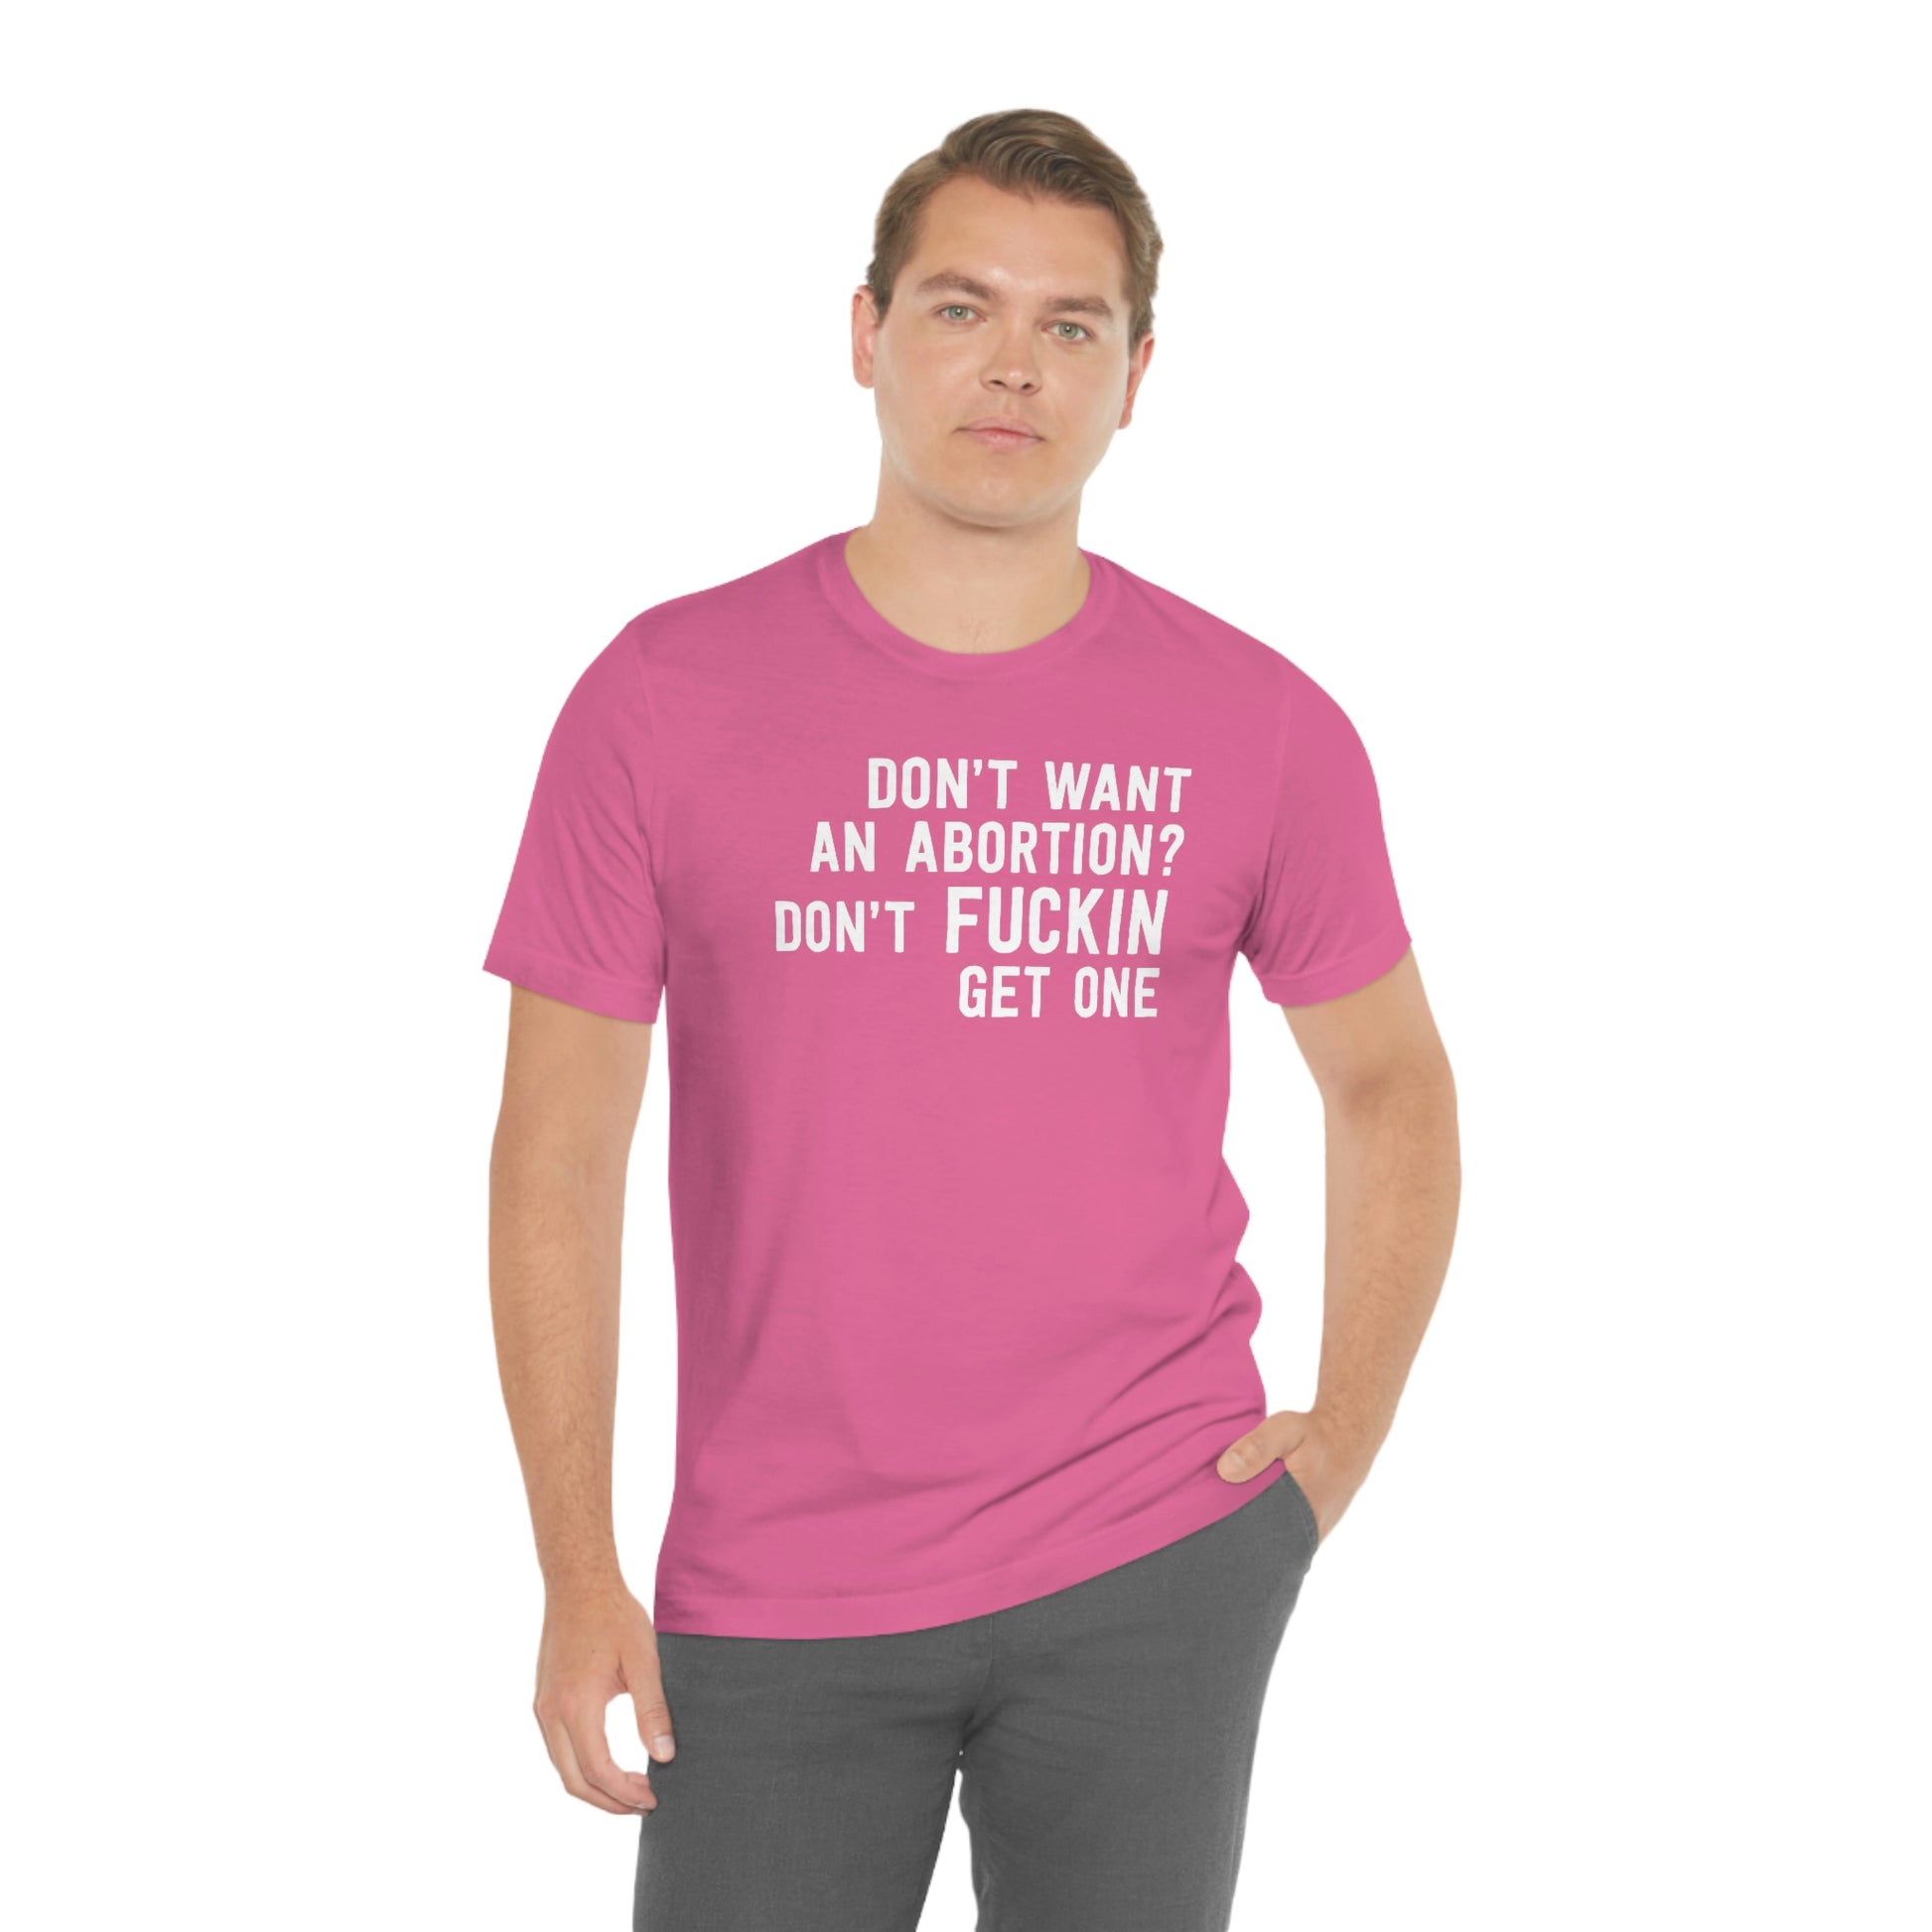 Don't want an abortion? Don't fucking get one T-Shirt in Pink - Male Model